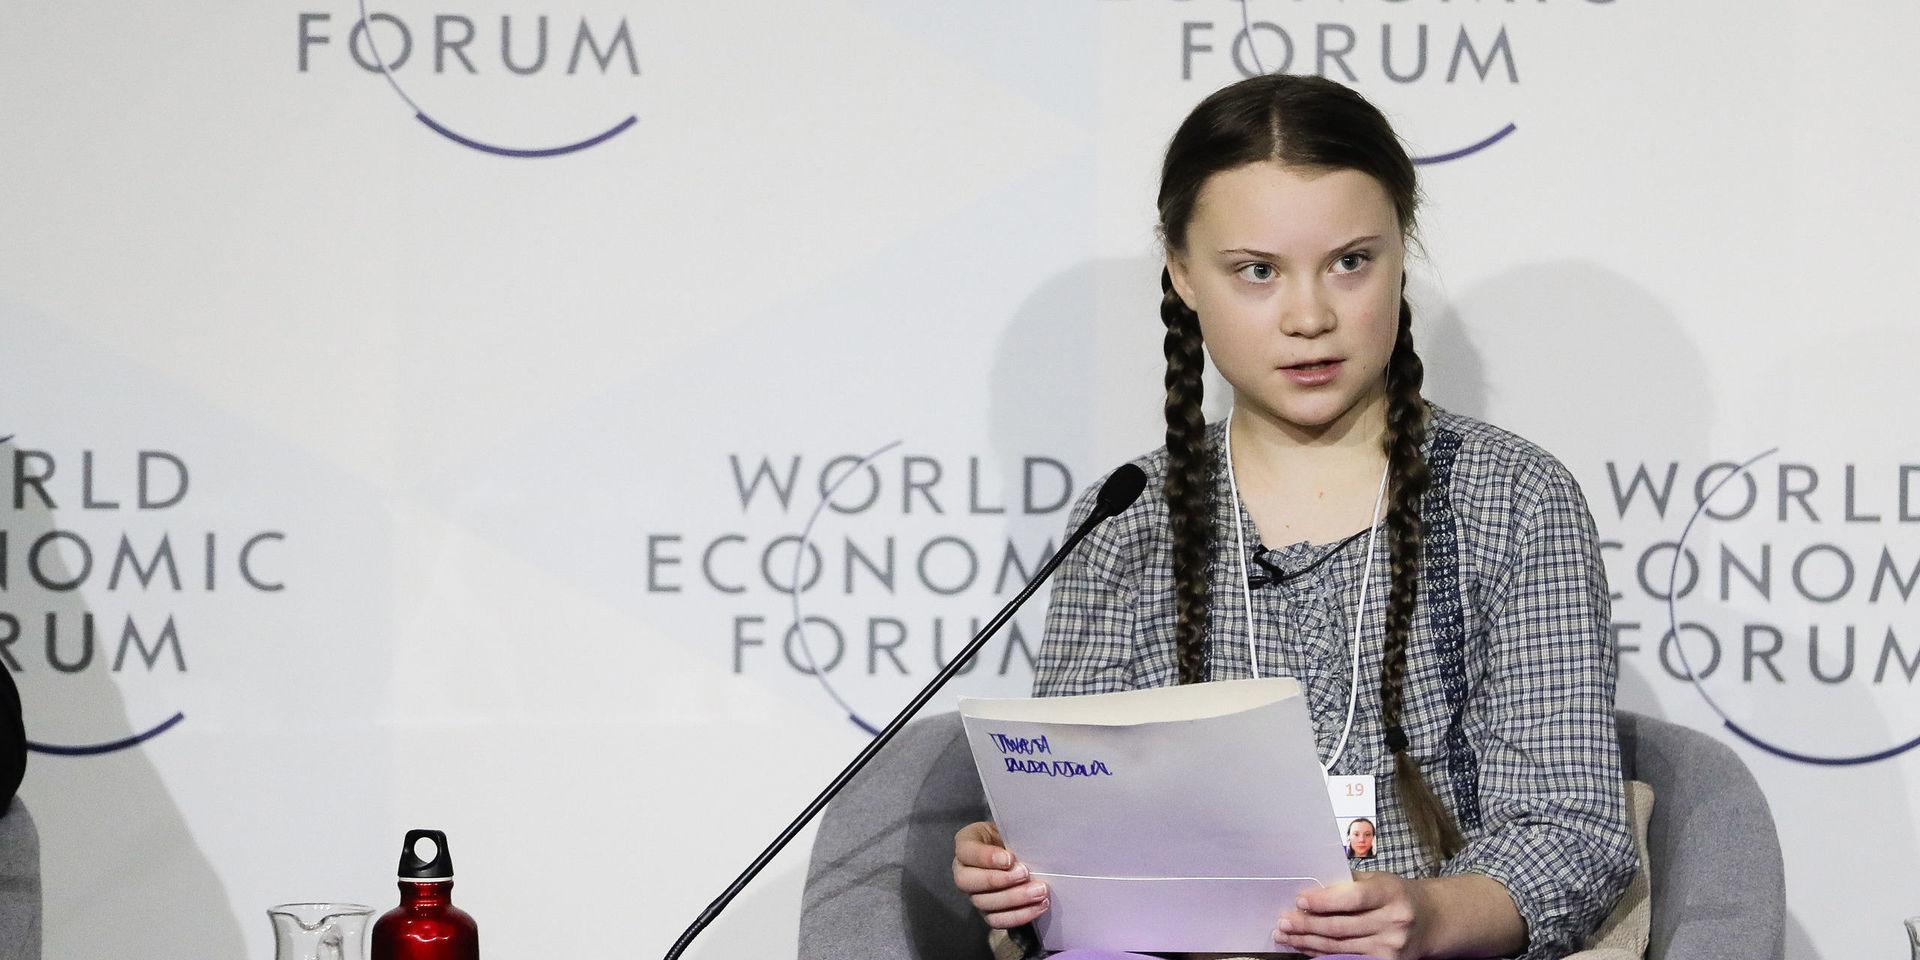 Climate activist Greta Thunberg delivers her speech during a session of the World Economic Forum in Davos, Switzerland, Friday, Jan. 25, 2019. (AP Photo/Markus Schreiber)